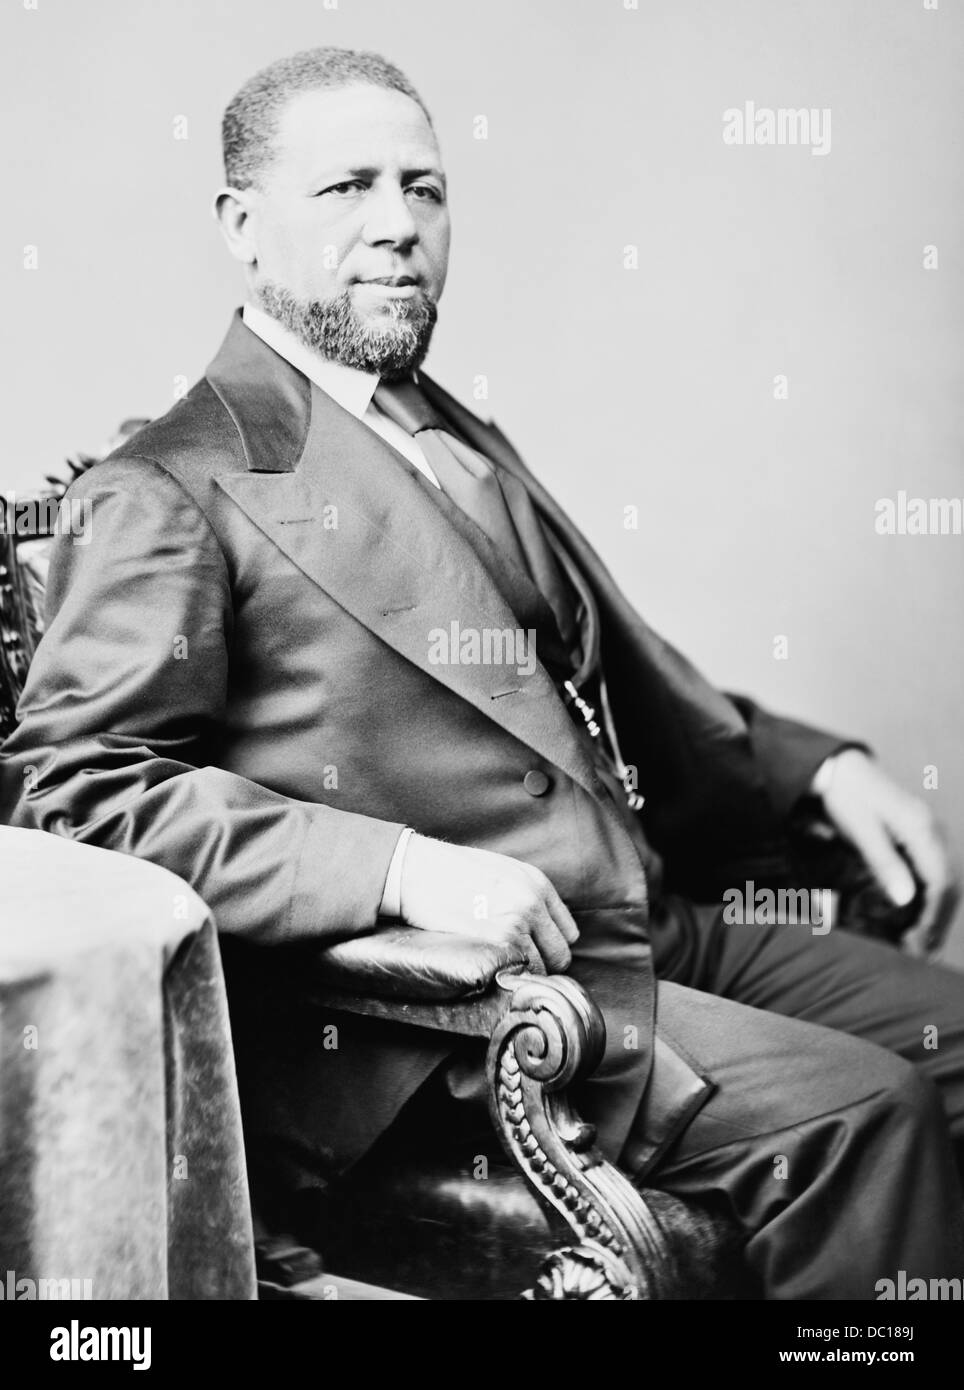 Hiram Revels High Resolution Stock Photography and Images - Alamy